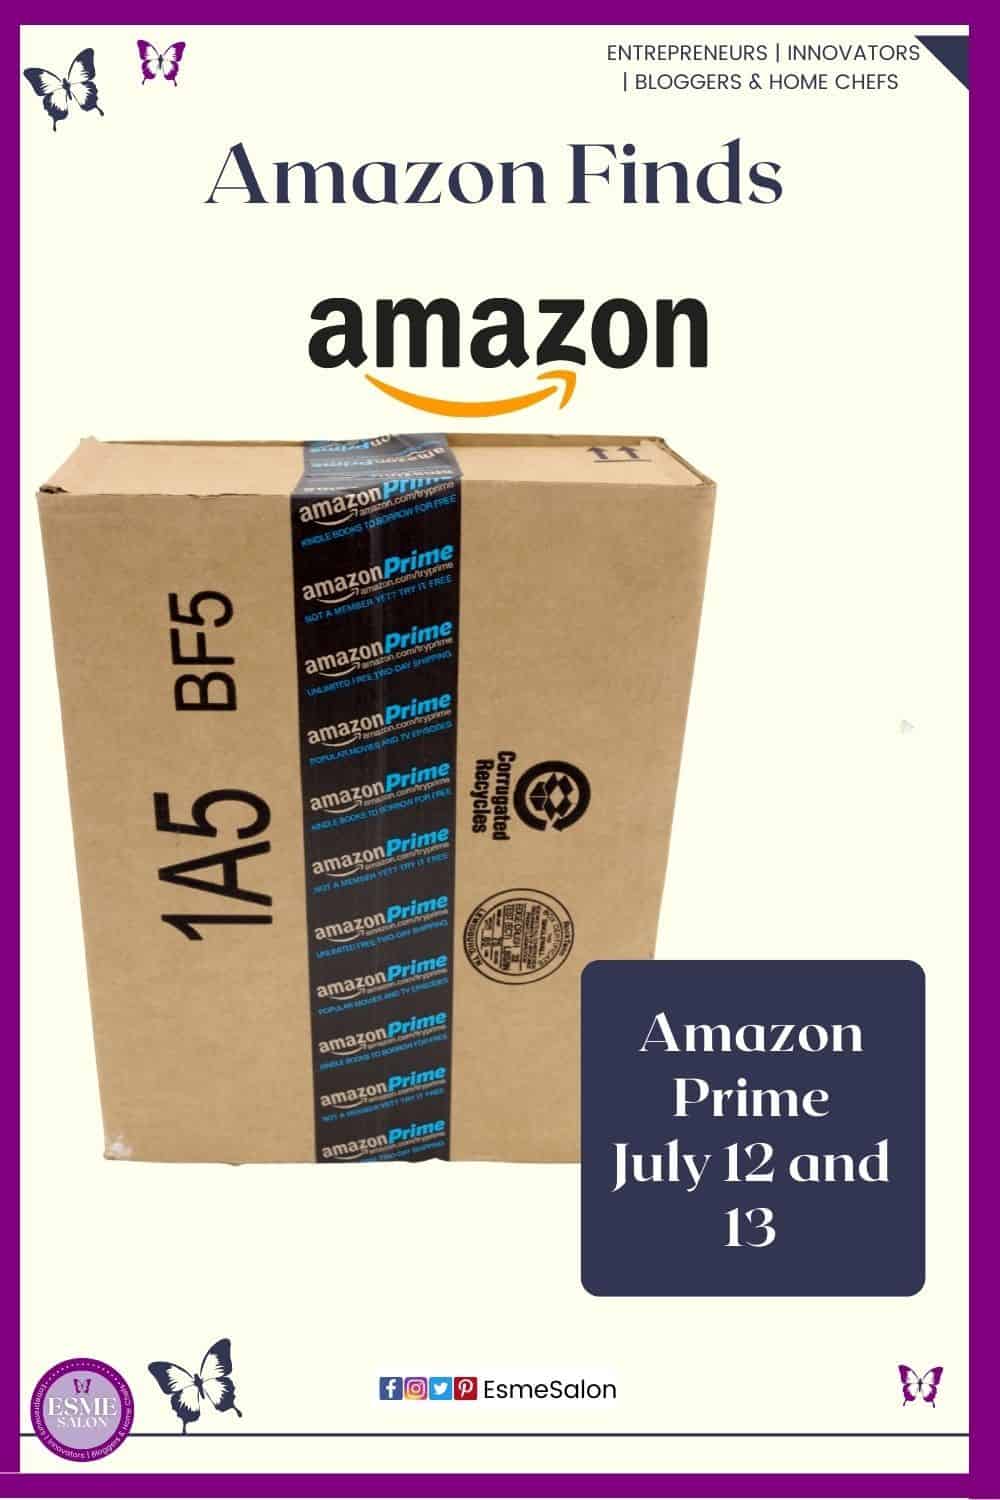 an image of an Amazon bog with the Amazon Prime label over it for Amazon Prime June 12 + 13